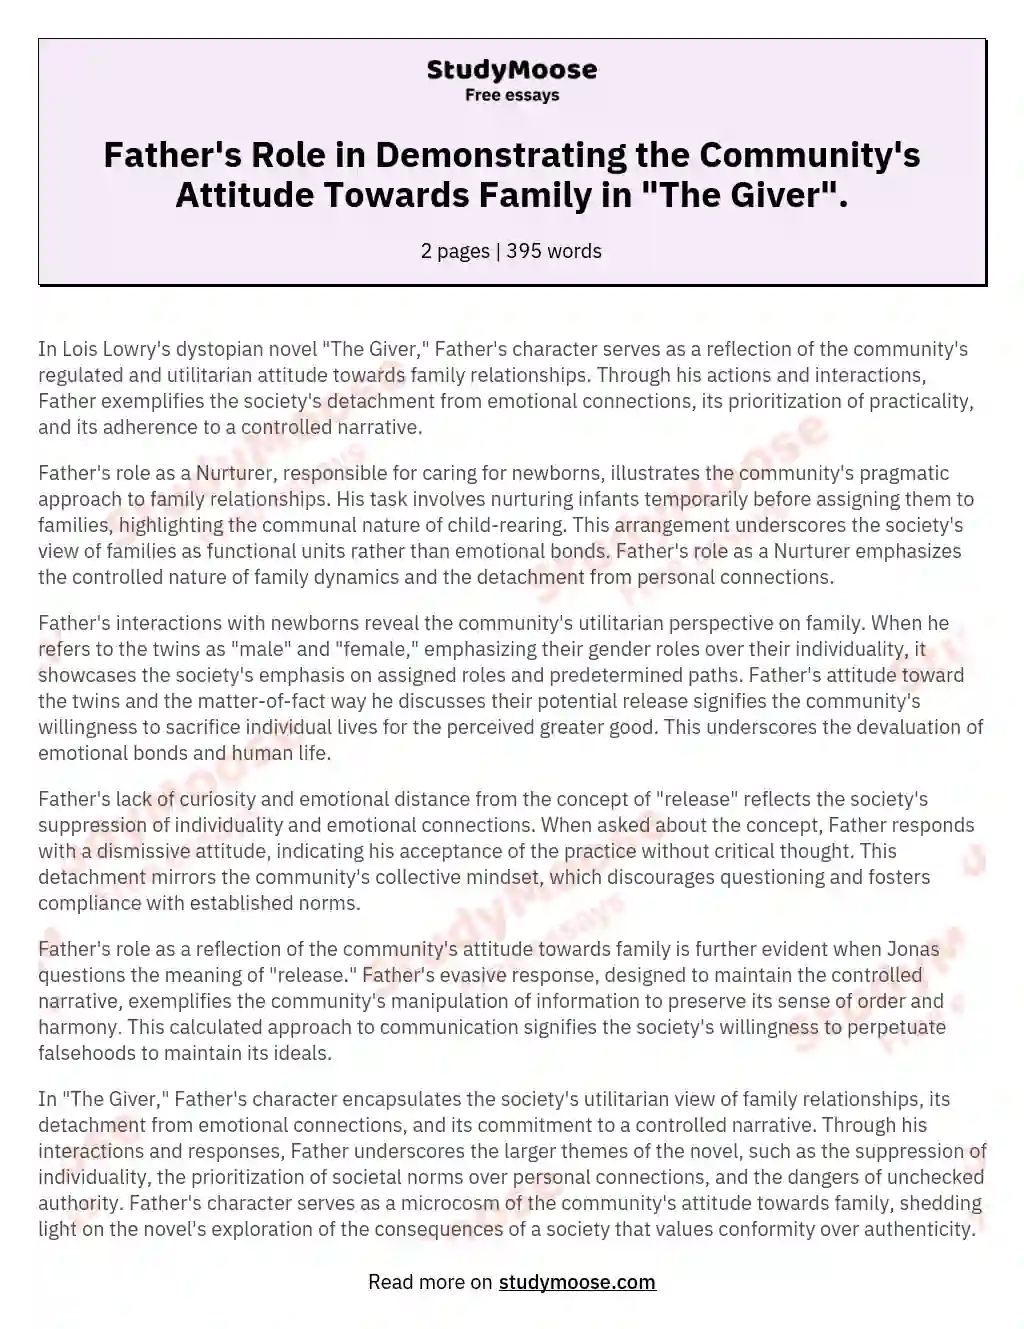 Father's Role in Demonstrating the Community's Attitude Towards Family in "The Giver". essay